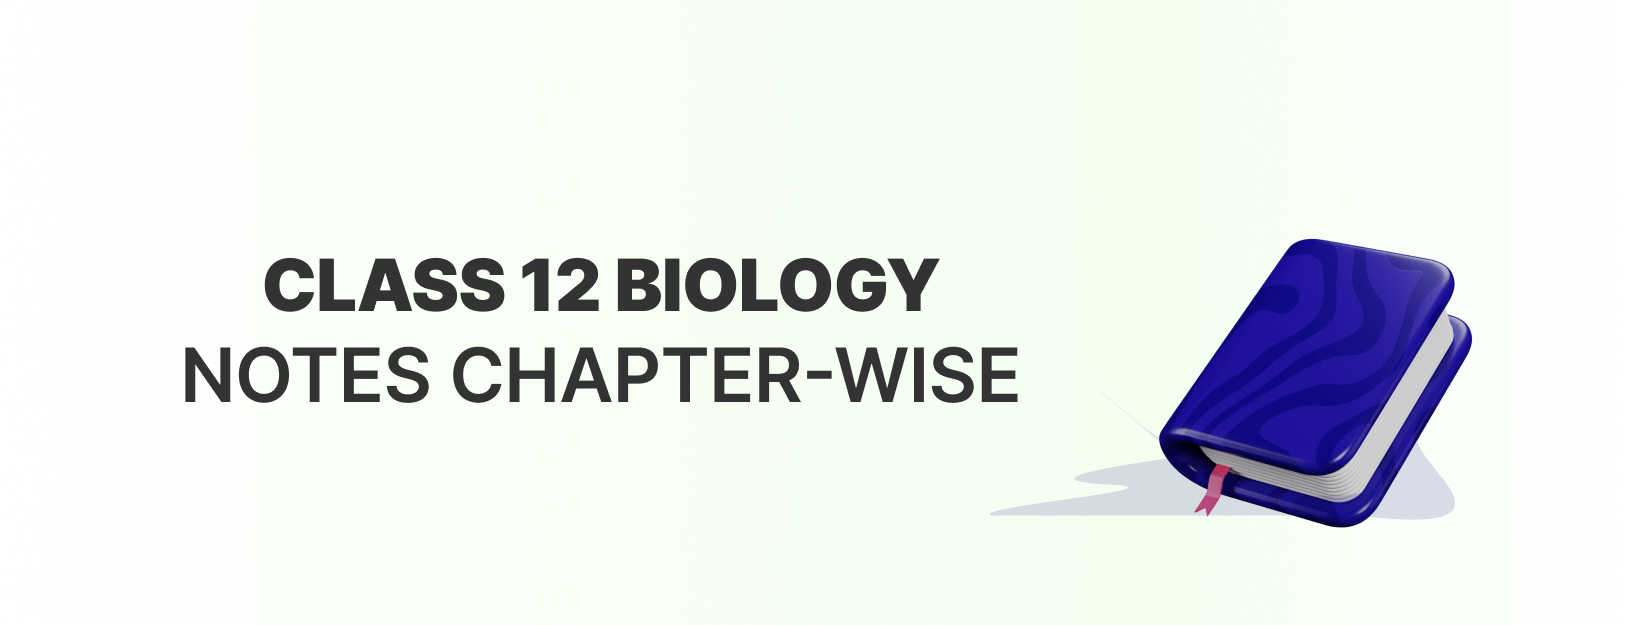 CBSE Class 12 Biology Chapter-wise Notes PDF